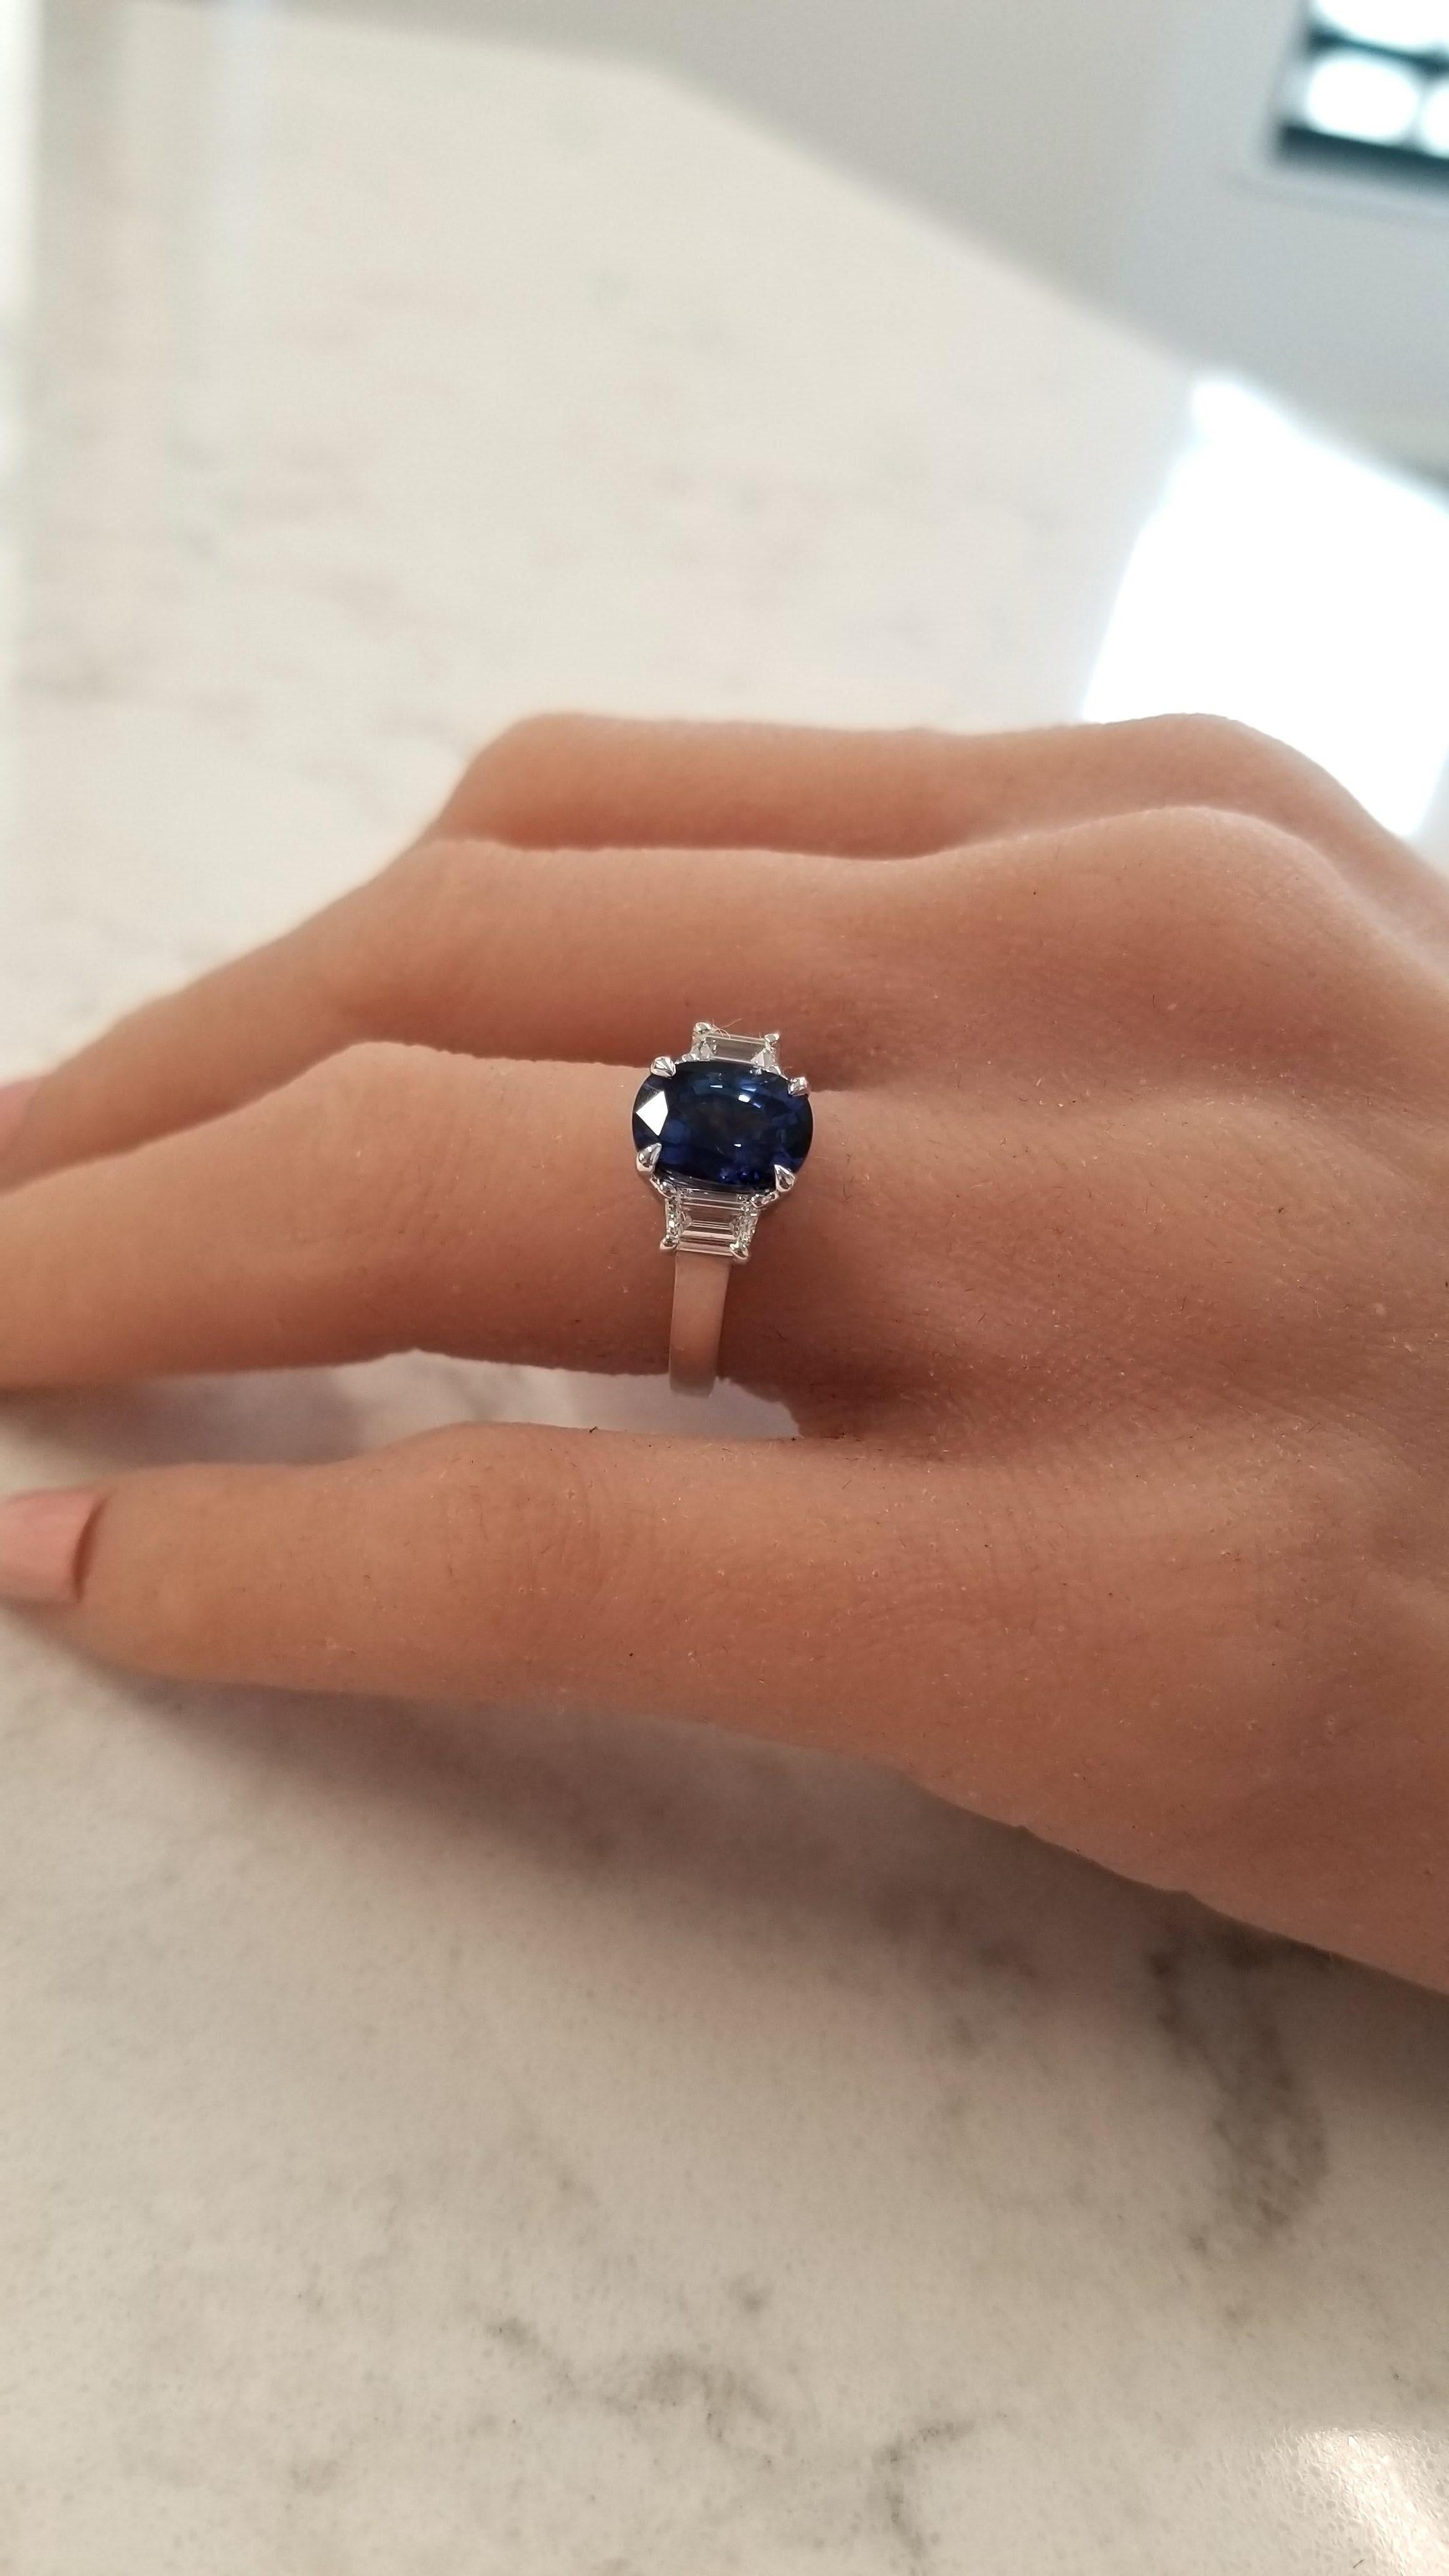 This is a 3.06 carat cushion cut sapphire that takes center stage on this lavish ring. The gem source is Sri Lanka; its color saturation is royal blue; its luster and transparency is excellent. It measures 9.5x7.5mm. Two step-cut trapezoid cut